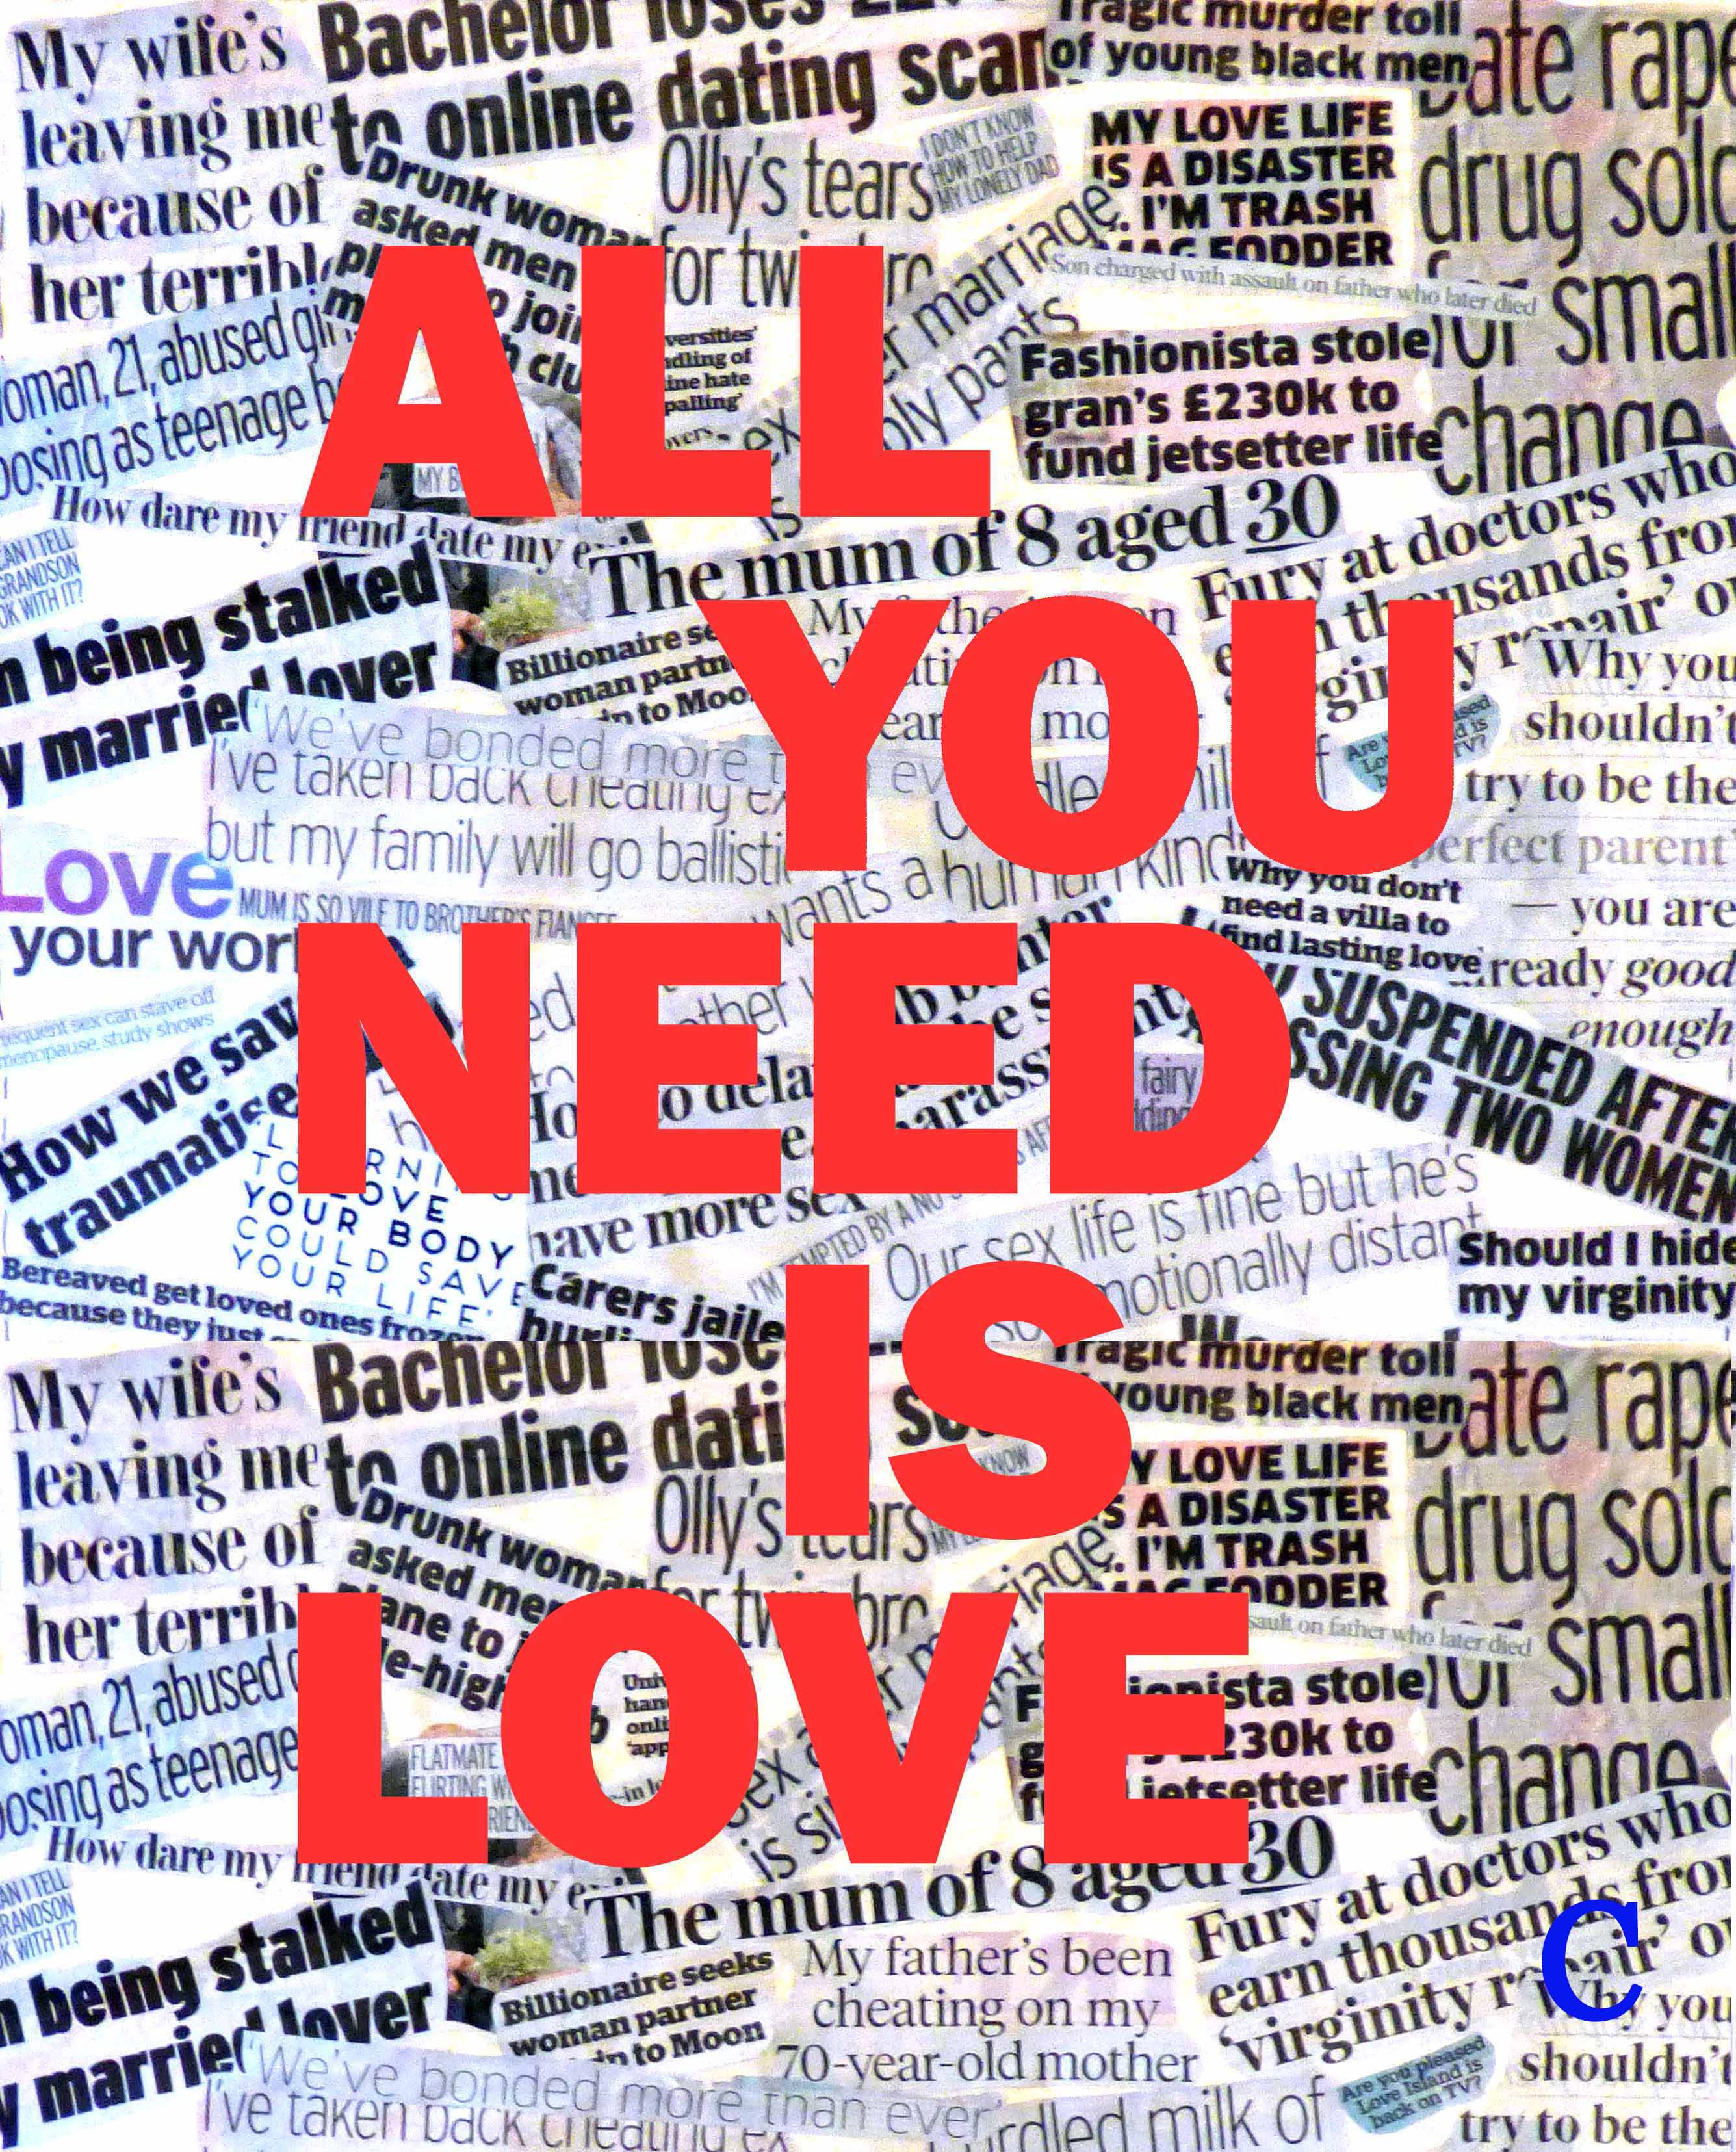 ALL YOU NEED IS LOVE, reverse applique on newsprint and textile, Rose Bowl competition 2021